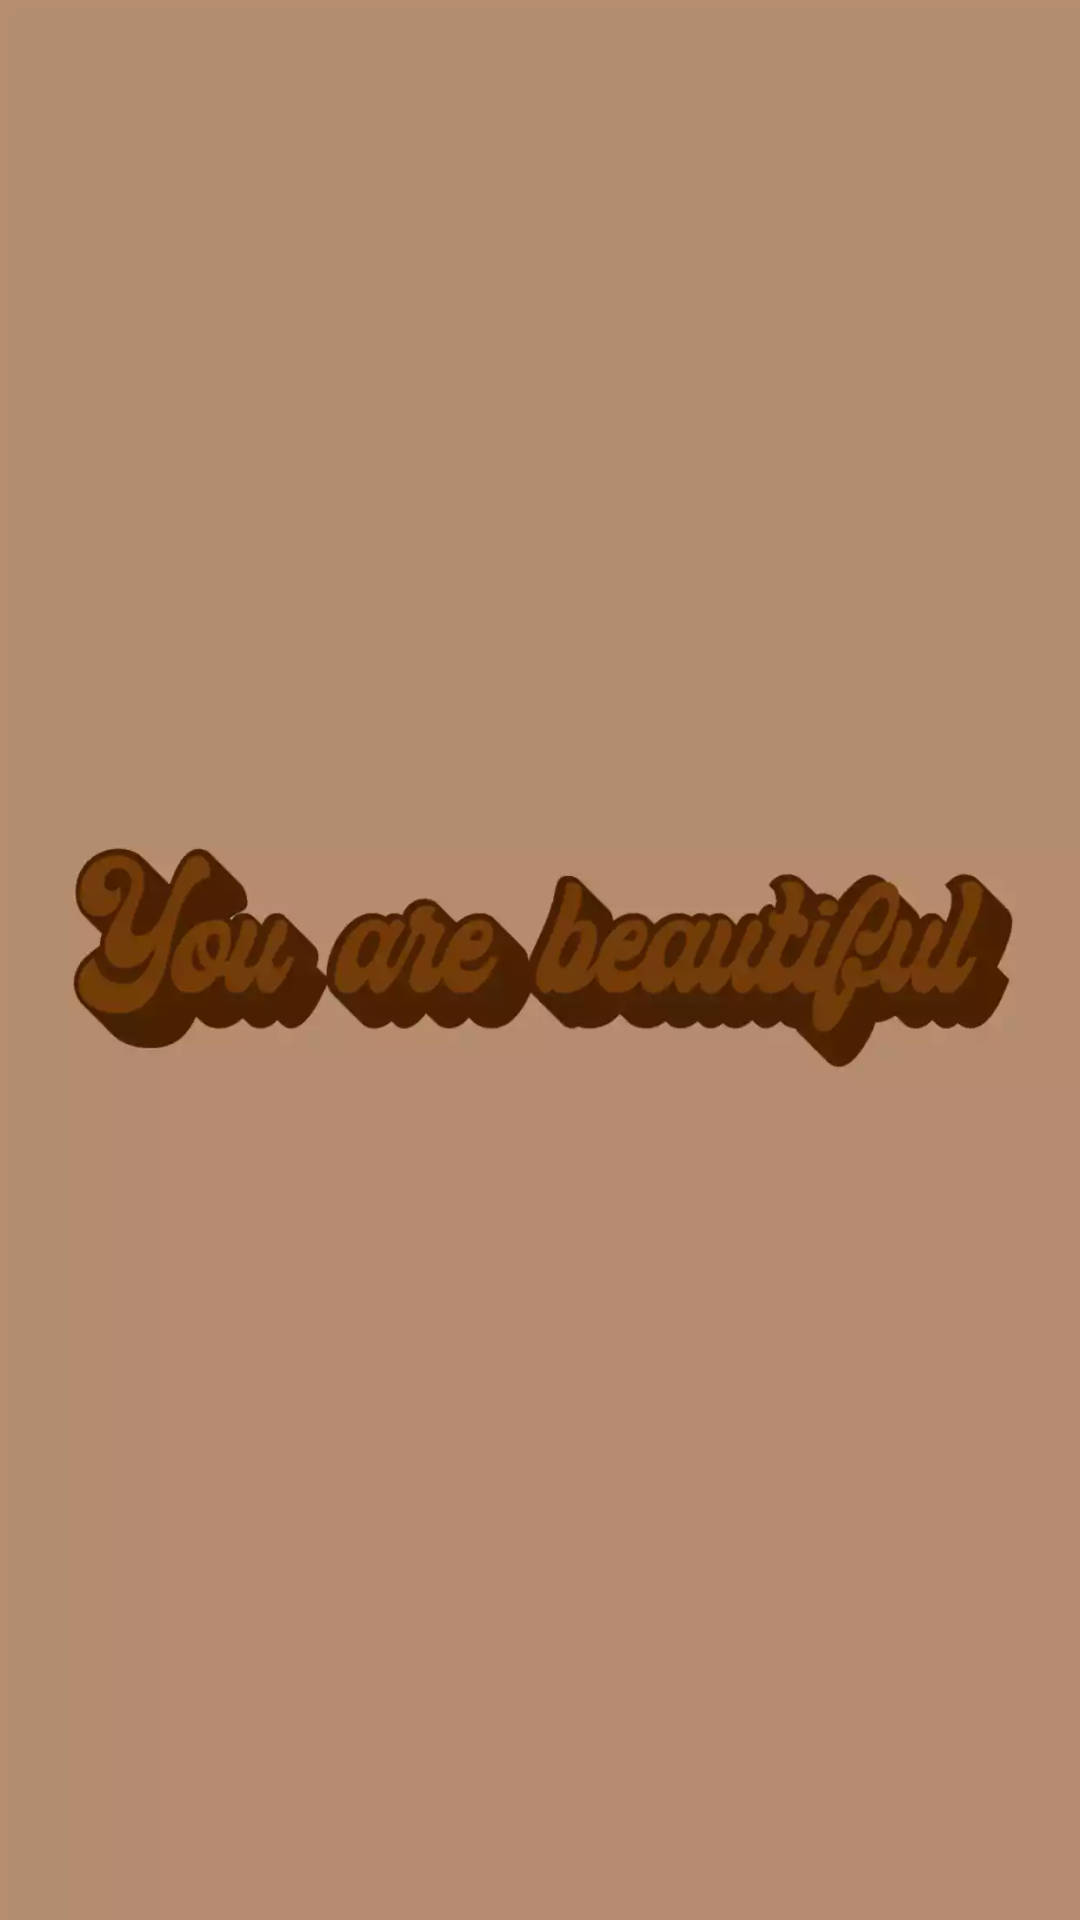 Light Brown You Are Beautiful Background